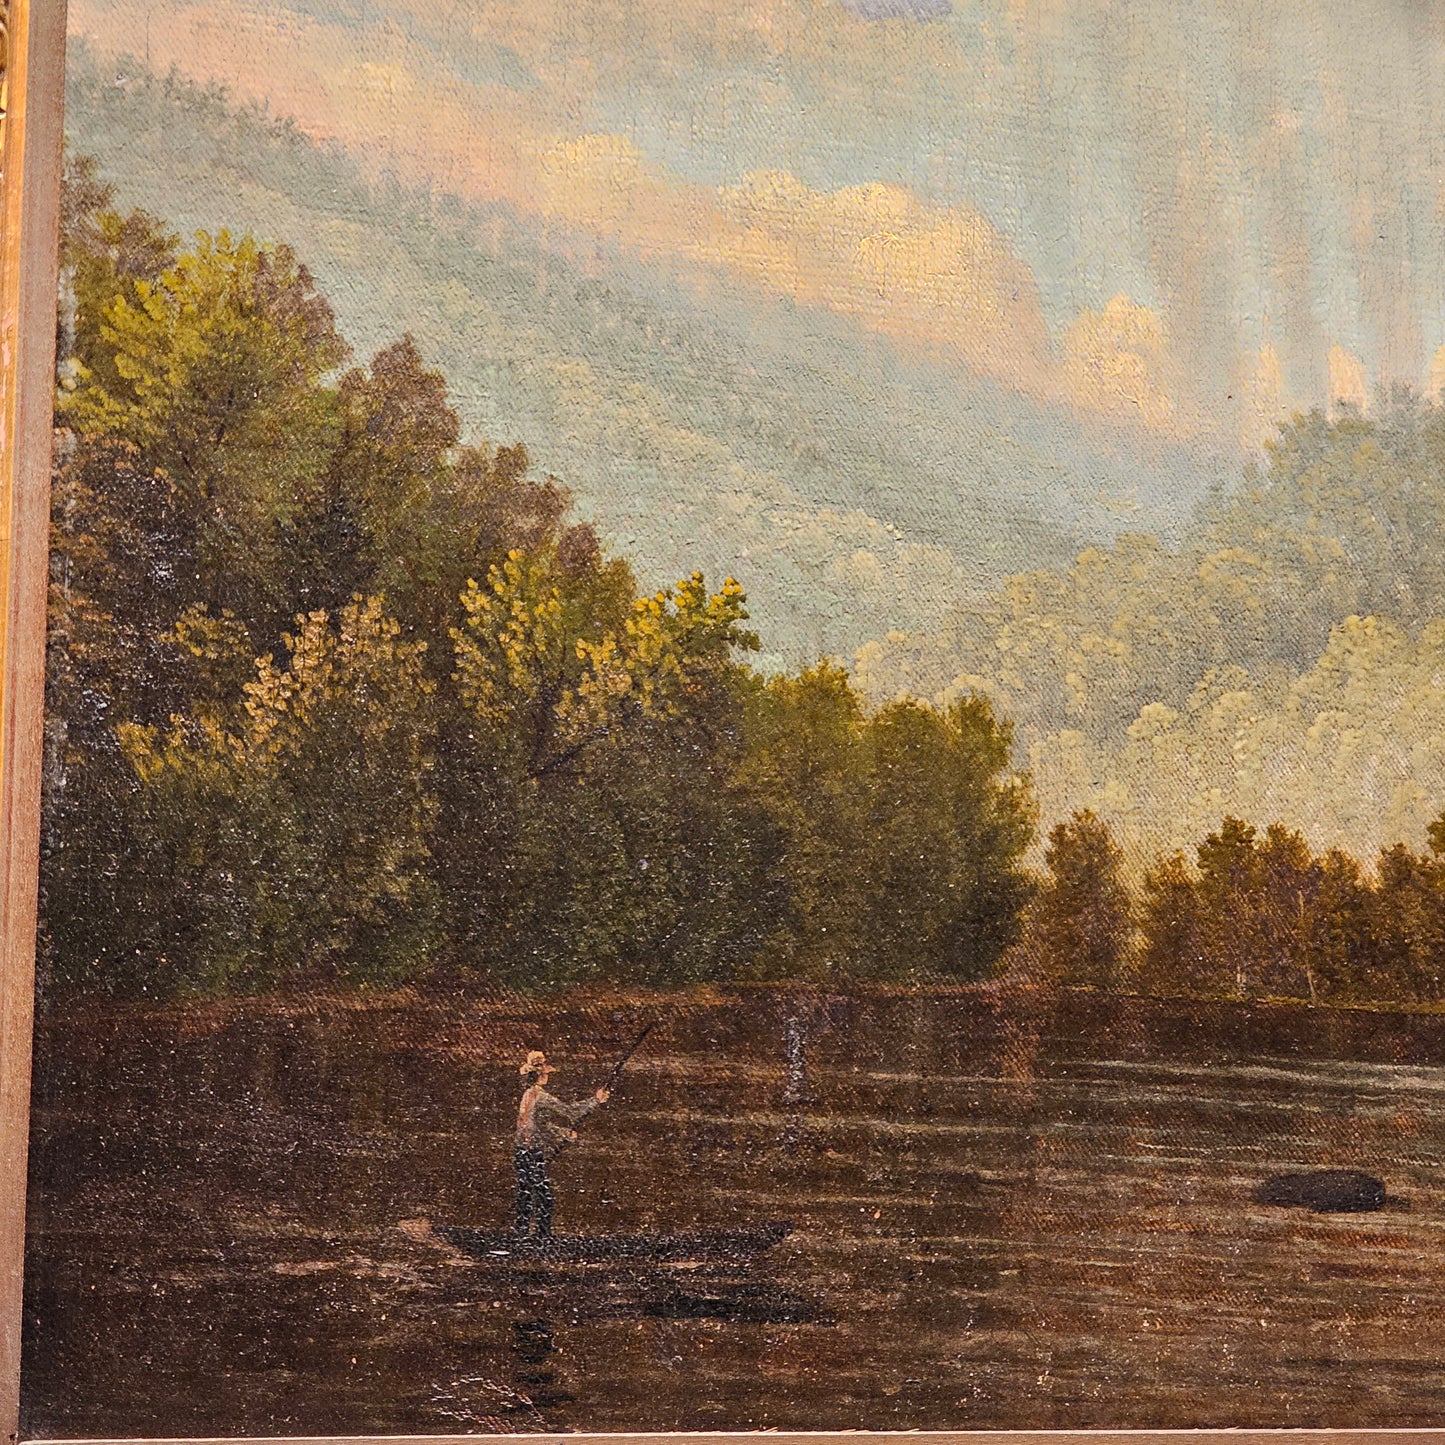 Antique Hudson River School Painting on Canvas of Men Fishing in River